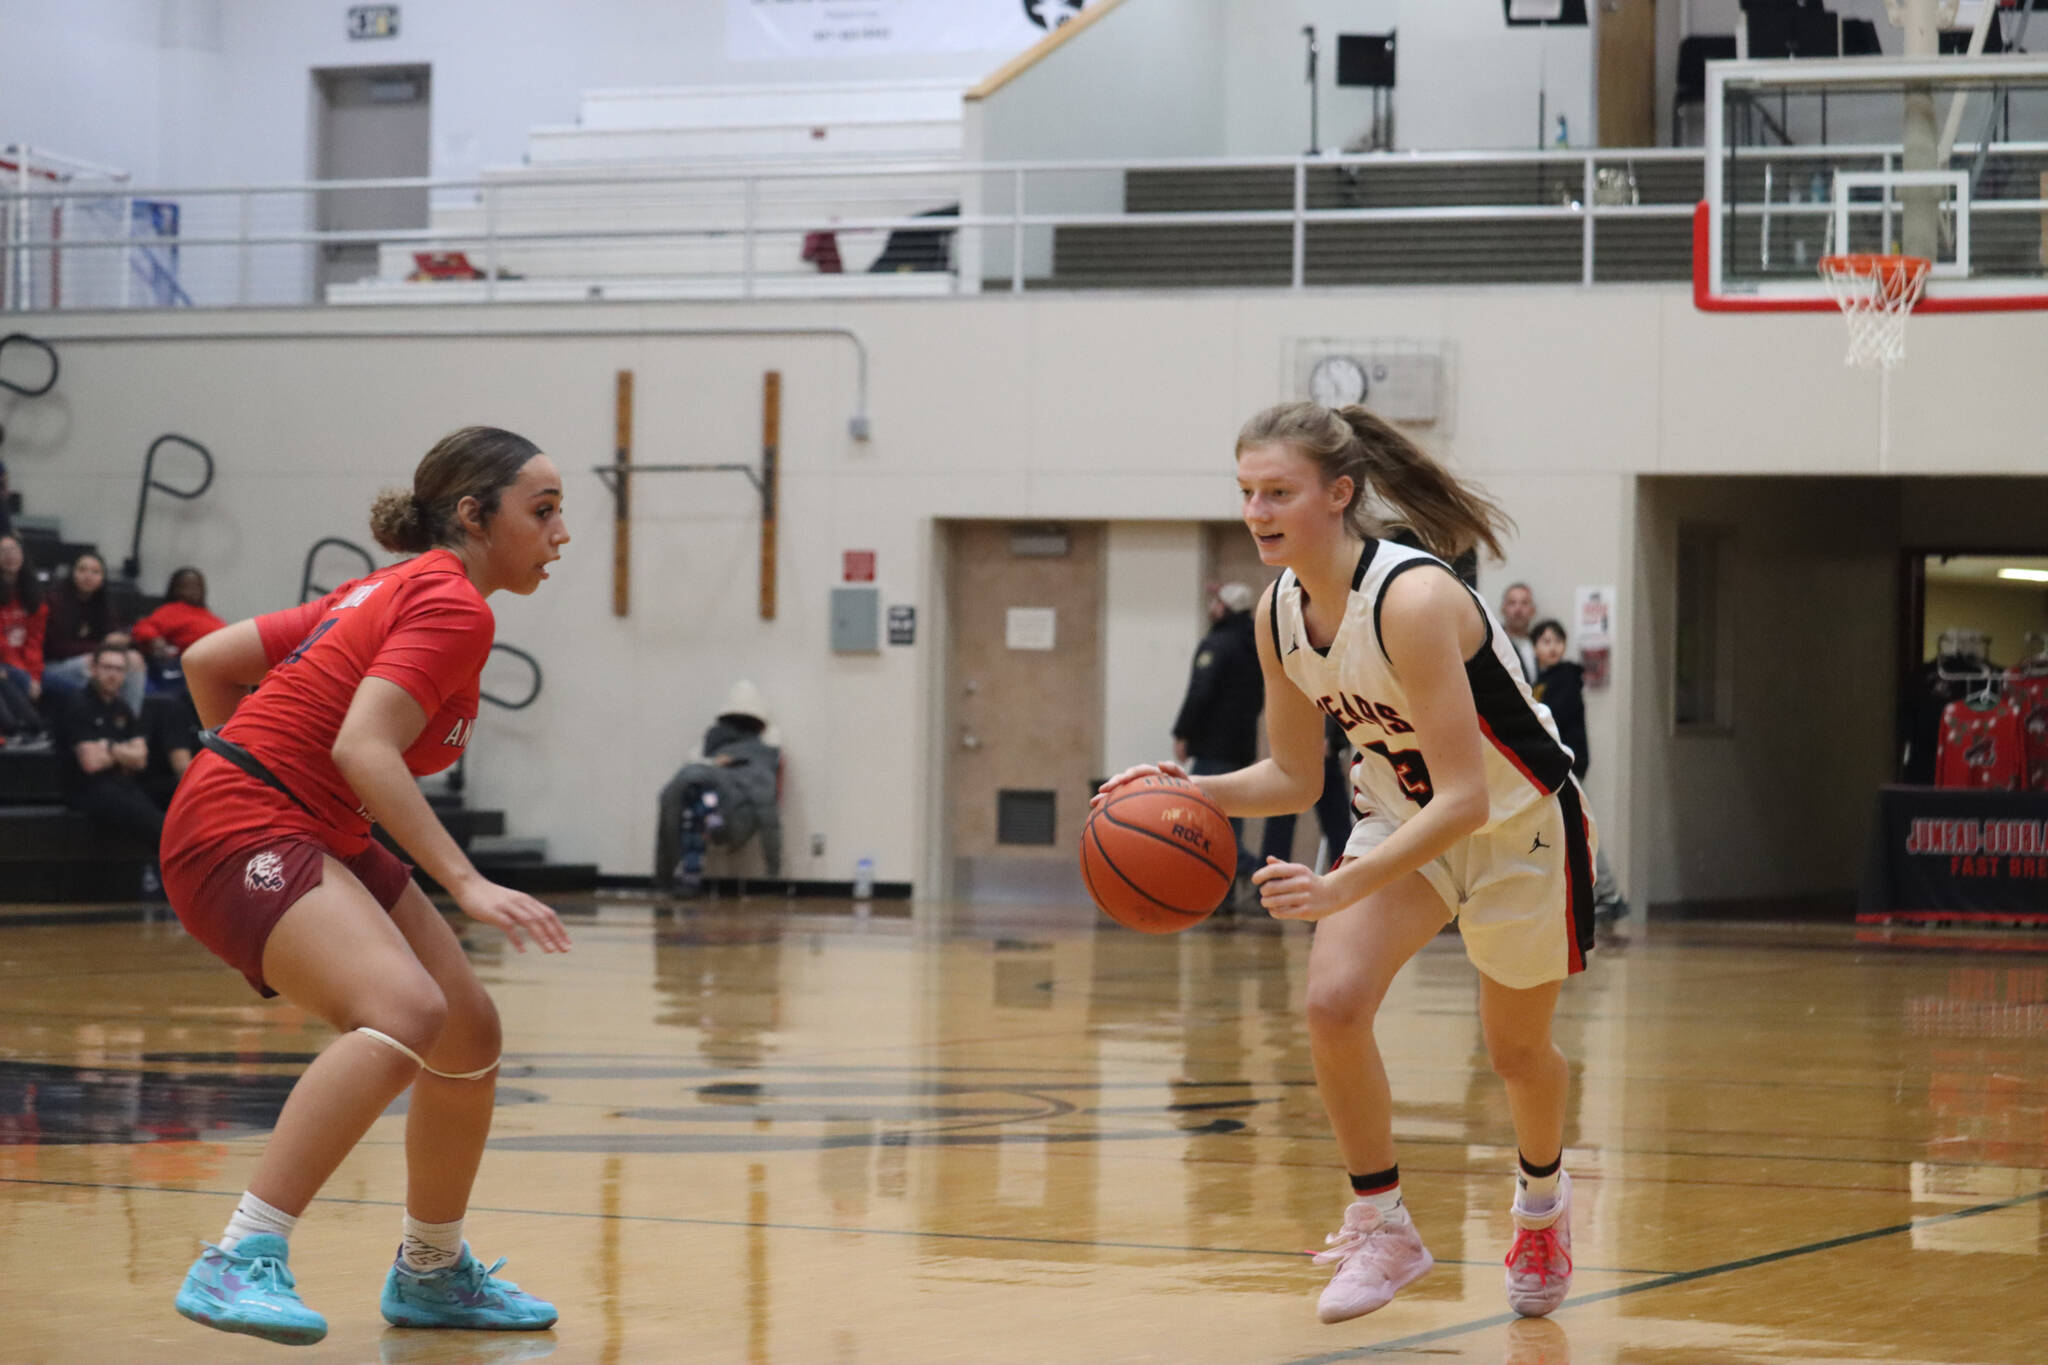 Skylar Tuckwood takes the ball down court against Anchorage Christian School on Friday, Dec. 30 where she led her team for a total of 23 points. (Jonson Kuhn / Juneau Empire)